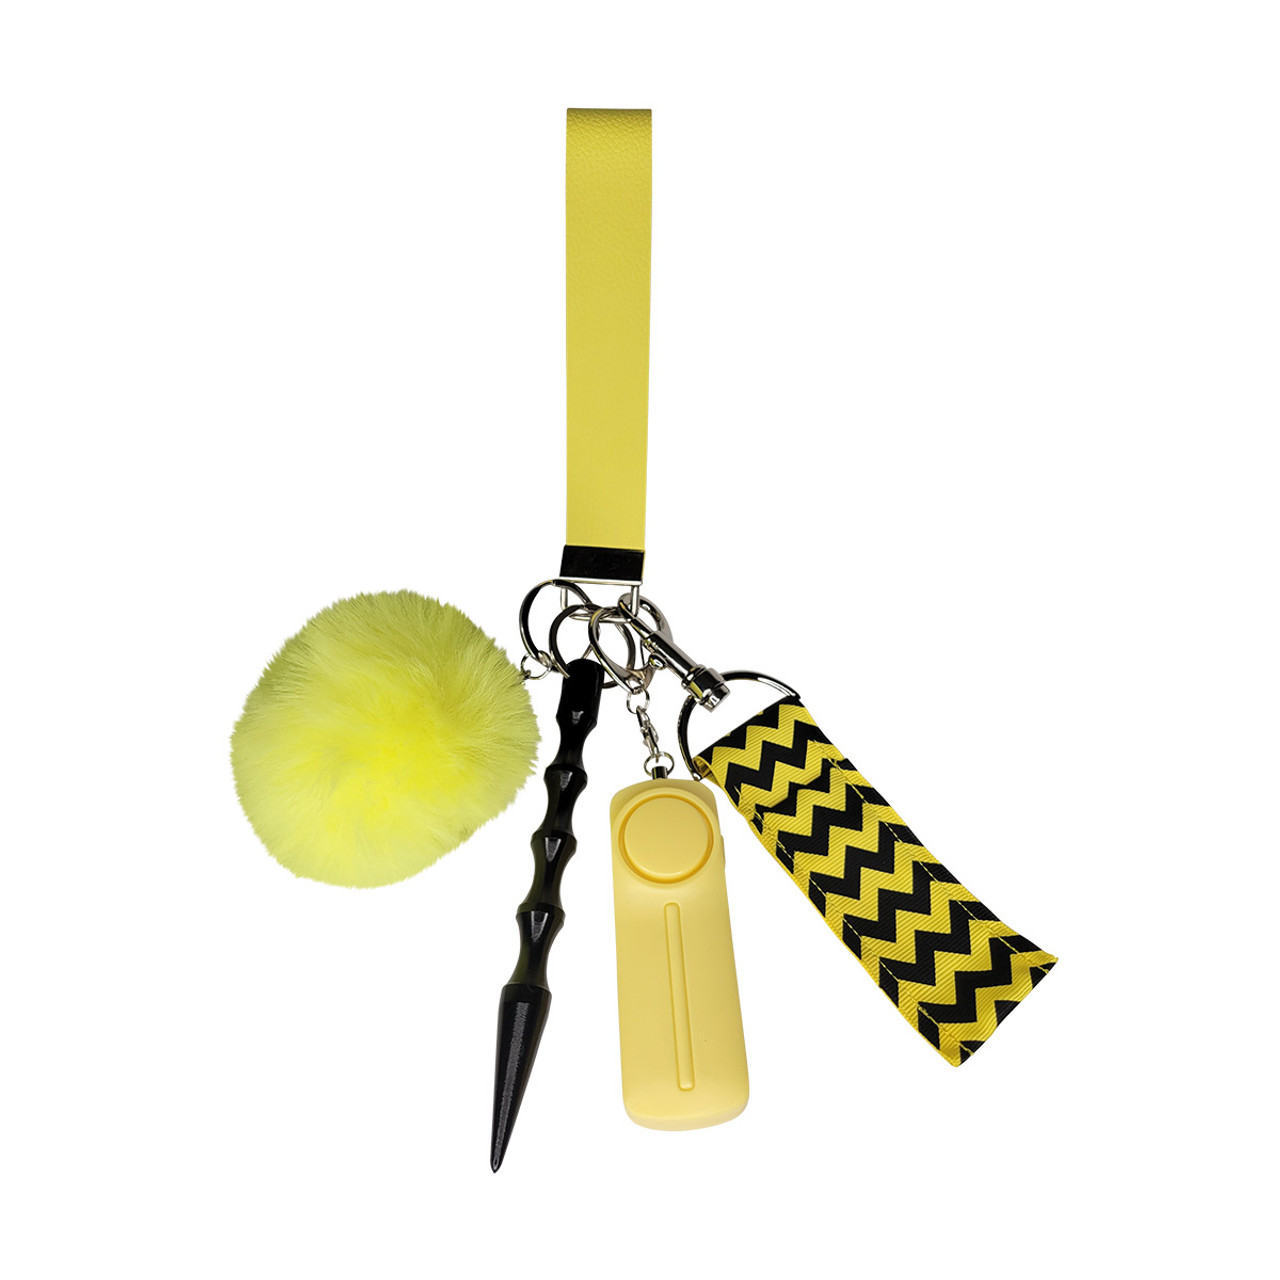 Yellow Self Defense Keychain – Safekey First Co